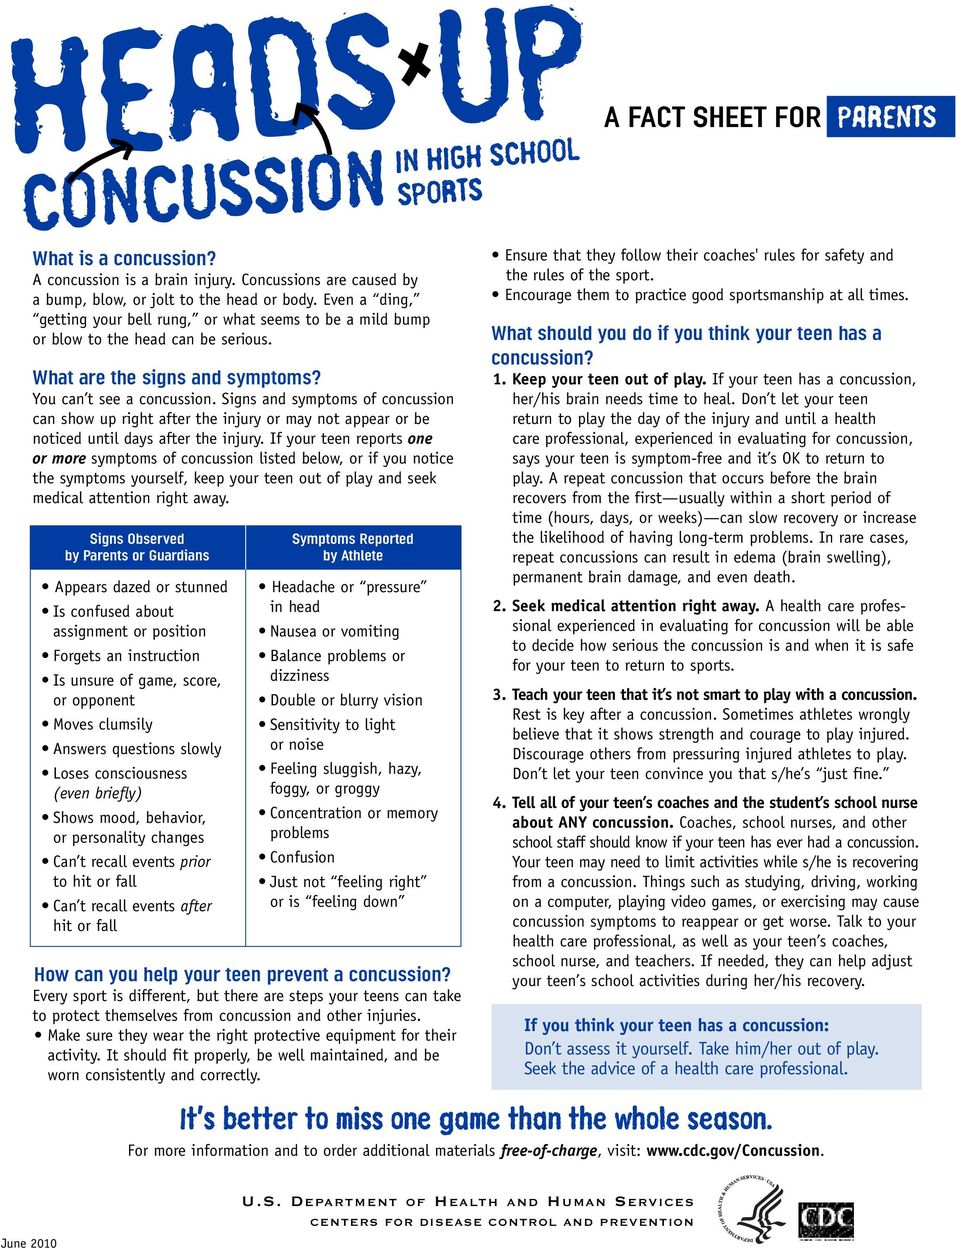 Signs and symptoms of concussion can show up right after the injury or may not appear or be noticed until days after the injury.